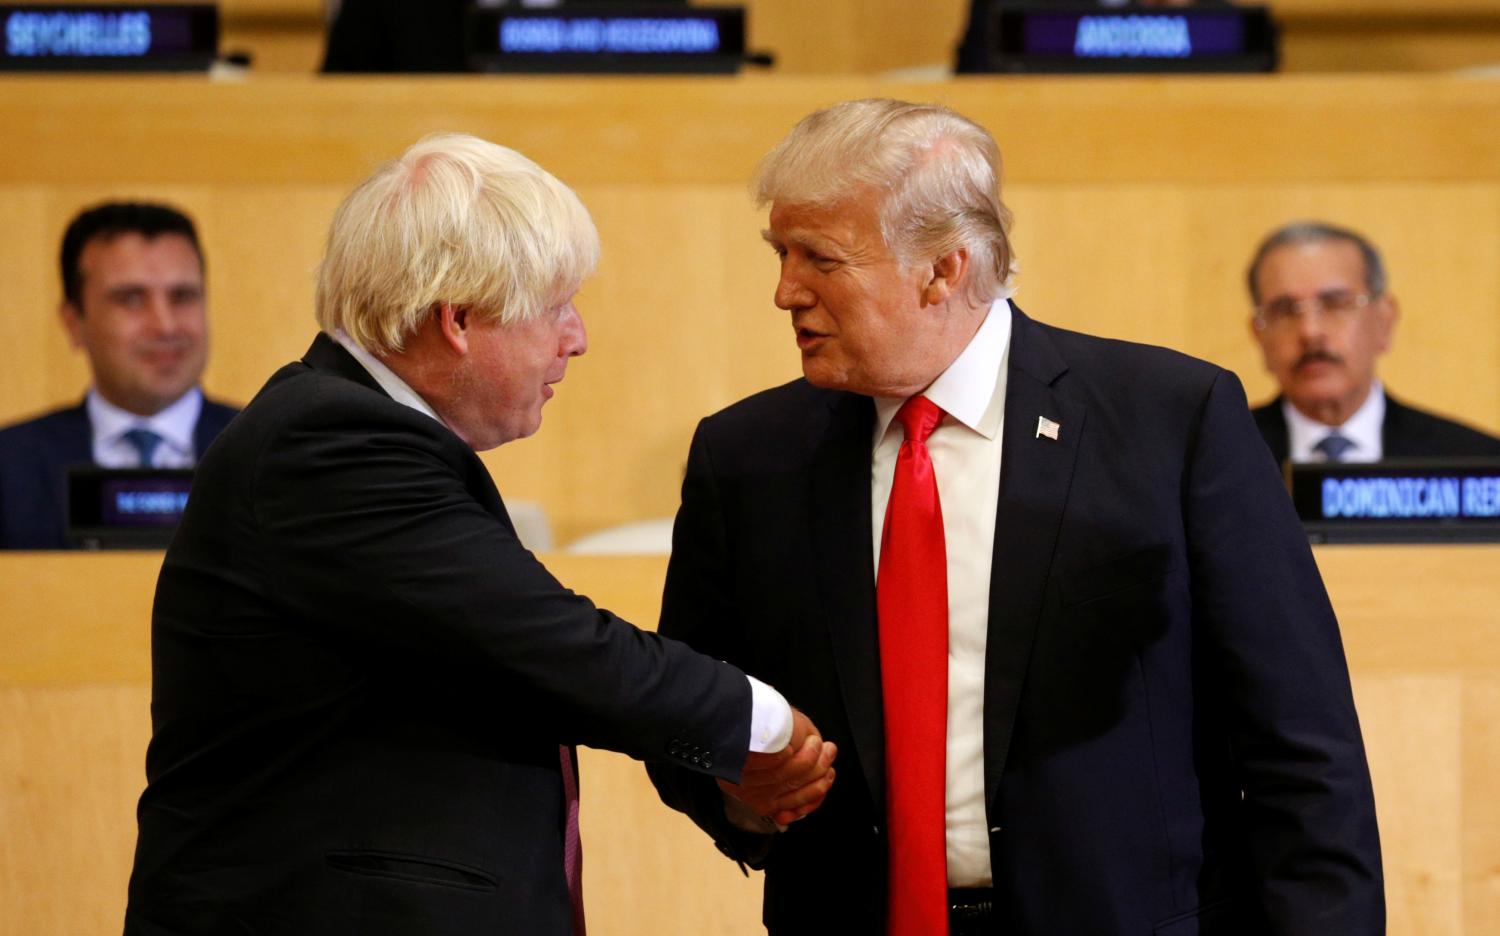 U.S. President Donald Trump shakes hands with British Foreign Secretary Boris Johnson (L) as they take part in a session on reforming the United Nations at U.N. Headquarters in New York, U.S., September 18, 2017. REUTERS/Kevin Lamarque - RC1B969FCF70